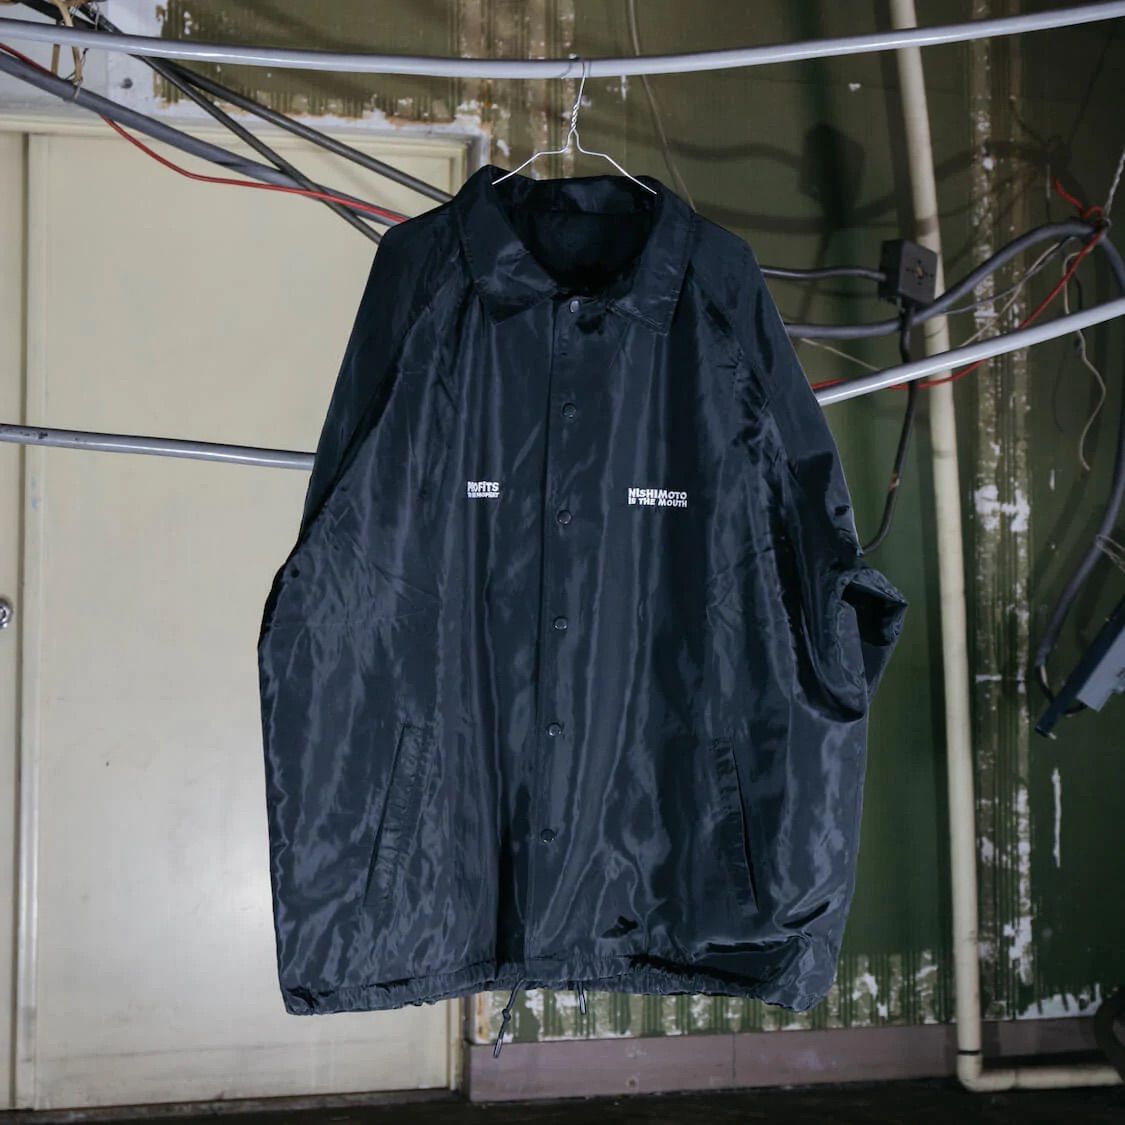 NISHIMOTO IS THE MOUTH - 【残りわずか】Prophet Coin Coach Jacket